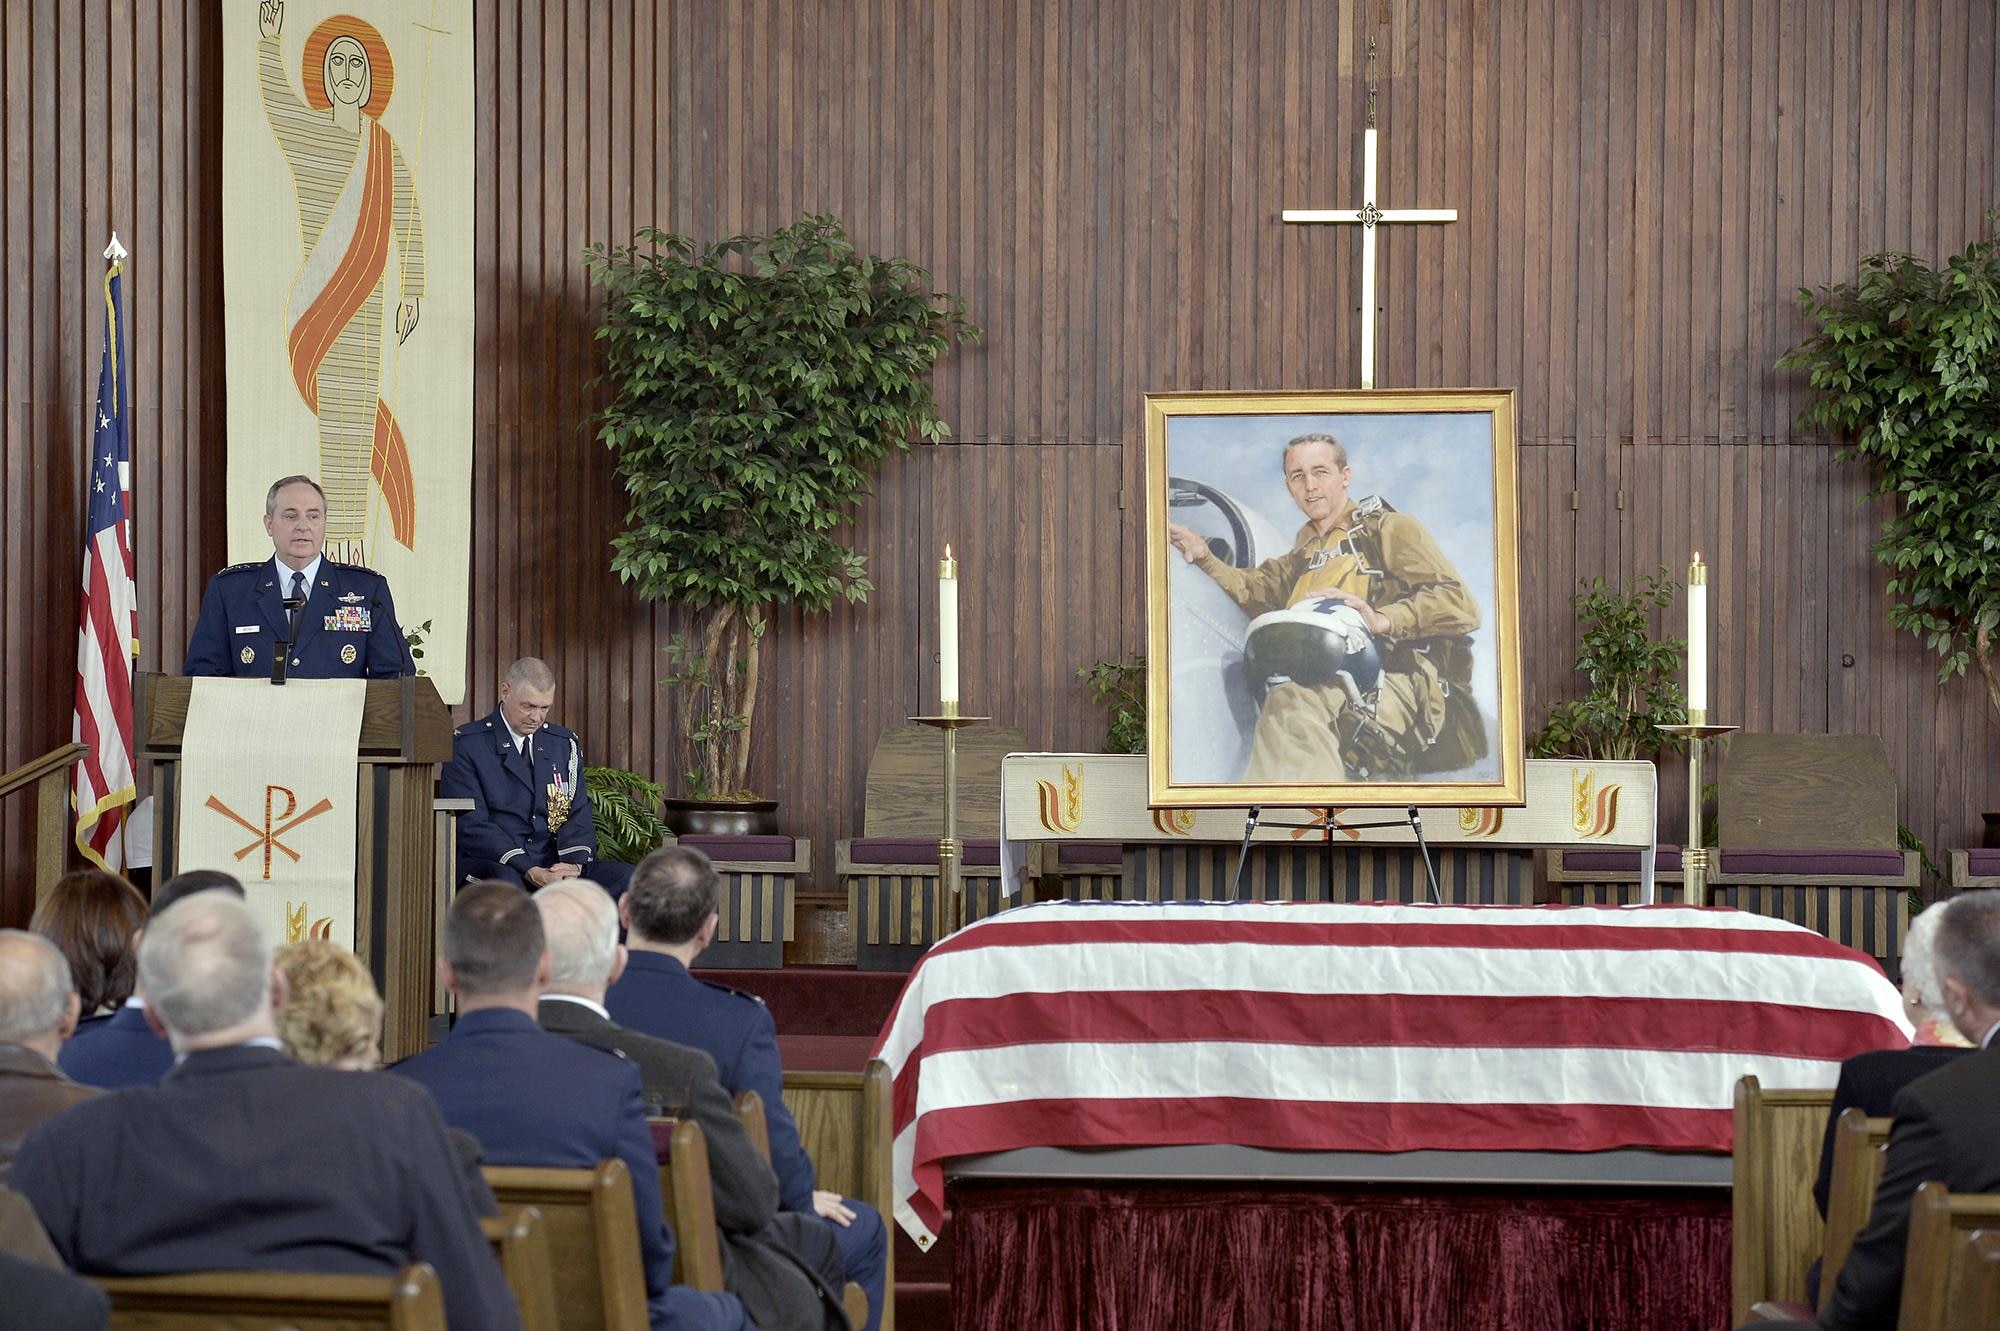 Air Force Chief of Staff Gen. Mark A. Welsh III  speaks at the internment ceremony for Brig. Gen. Robinson "Robbie" Risner at the Memorial chapel on Fort Myer, Arlington, Va., before being laid to rest at Arlington National Cemetery, Jan. 23, 2014.  Risner was one of the most celebrated pilots in Air Force history and survived seven and a half years of captivity in Hoa Lo Prison, also known as the Hanoi Hilton.  (U.S. Air Force photo/Michael J. Pausic)